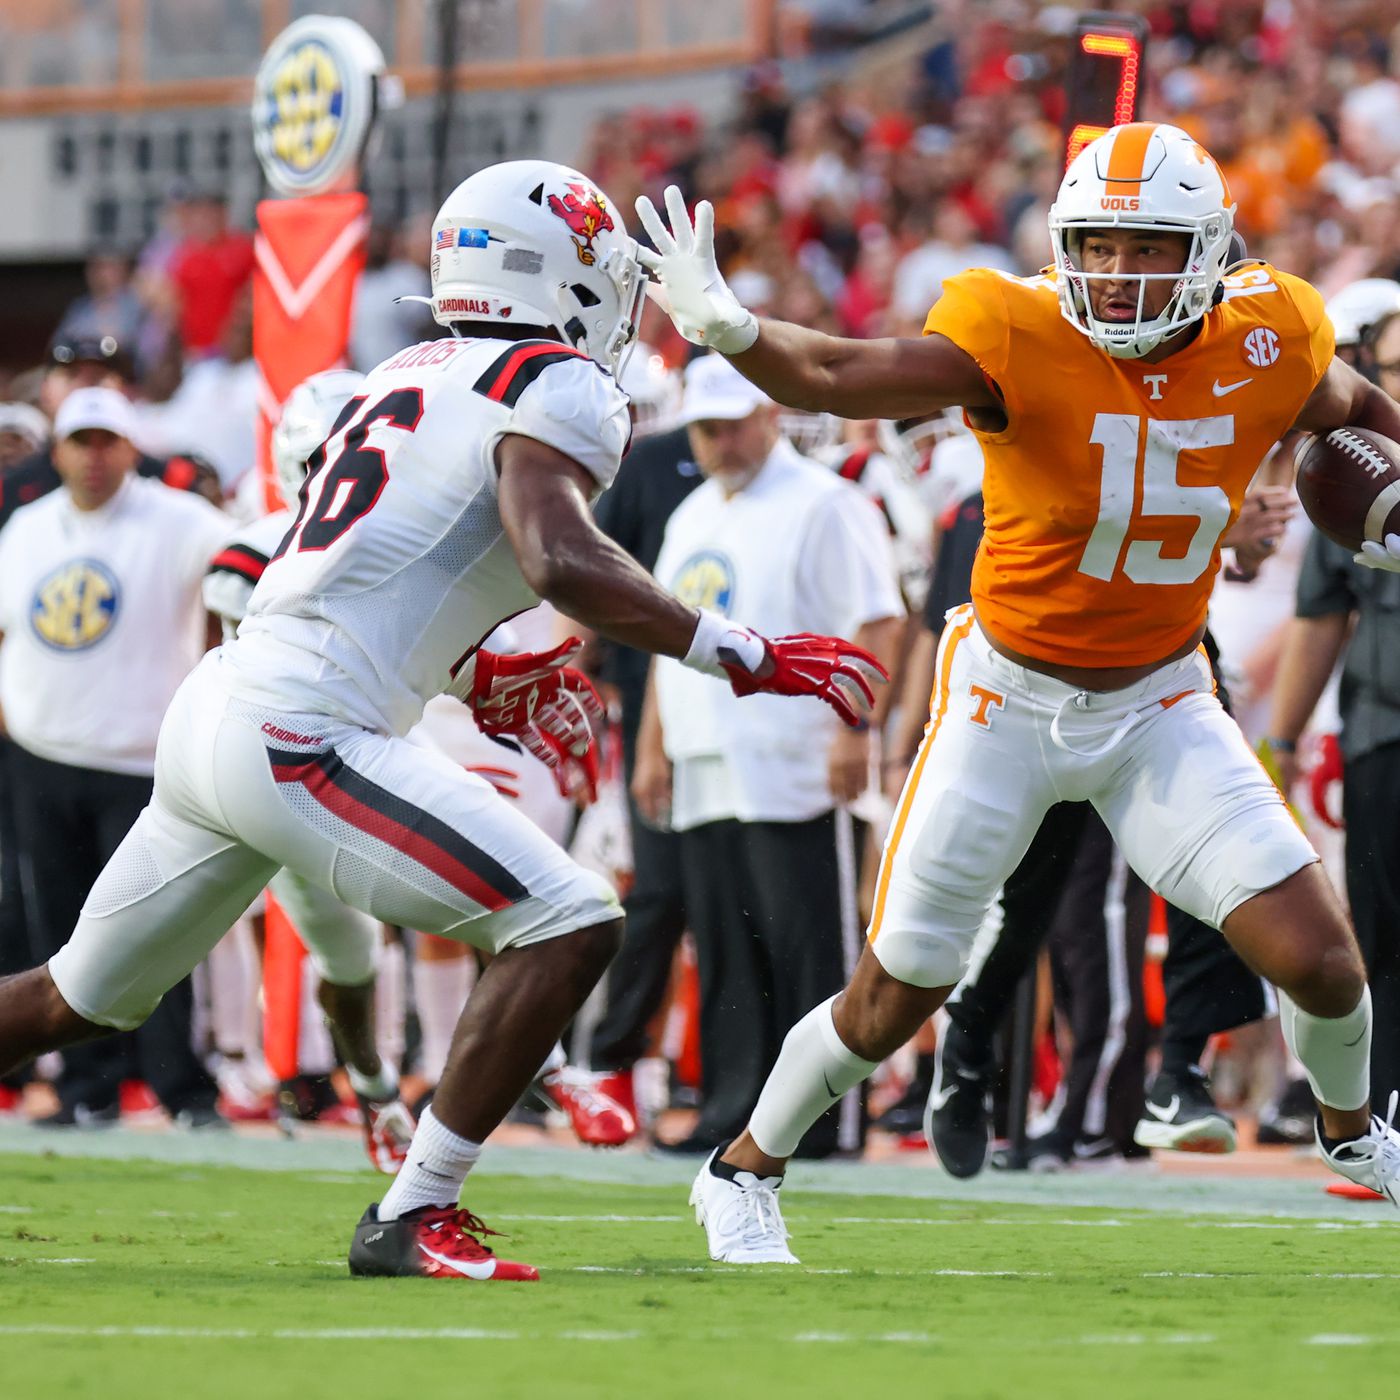 Tennessee vs. Florida: Bru McCoy will play a major role in Saturday's game against the Gators